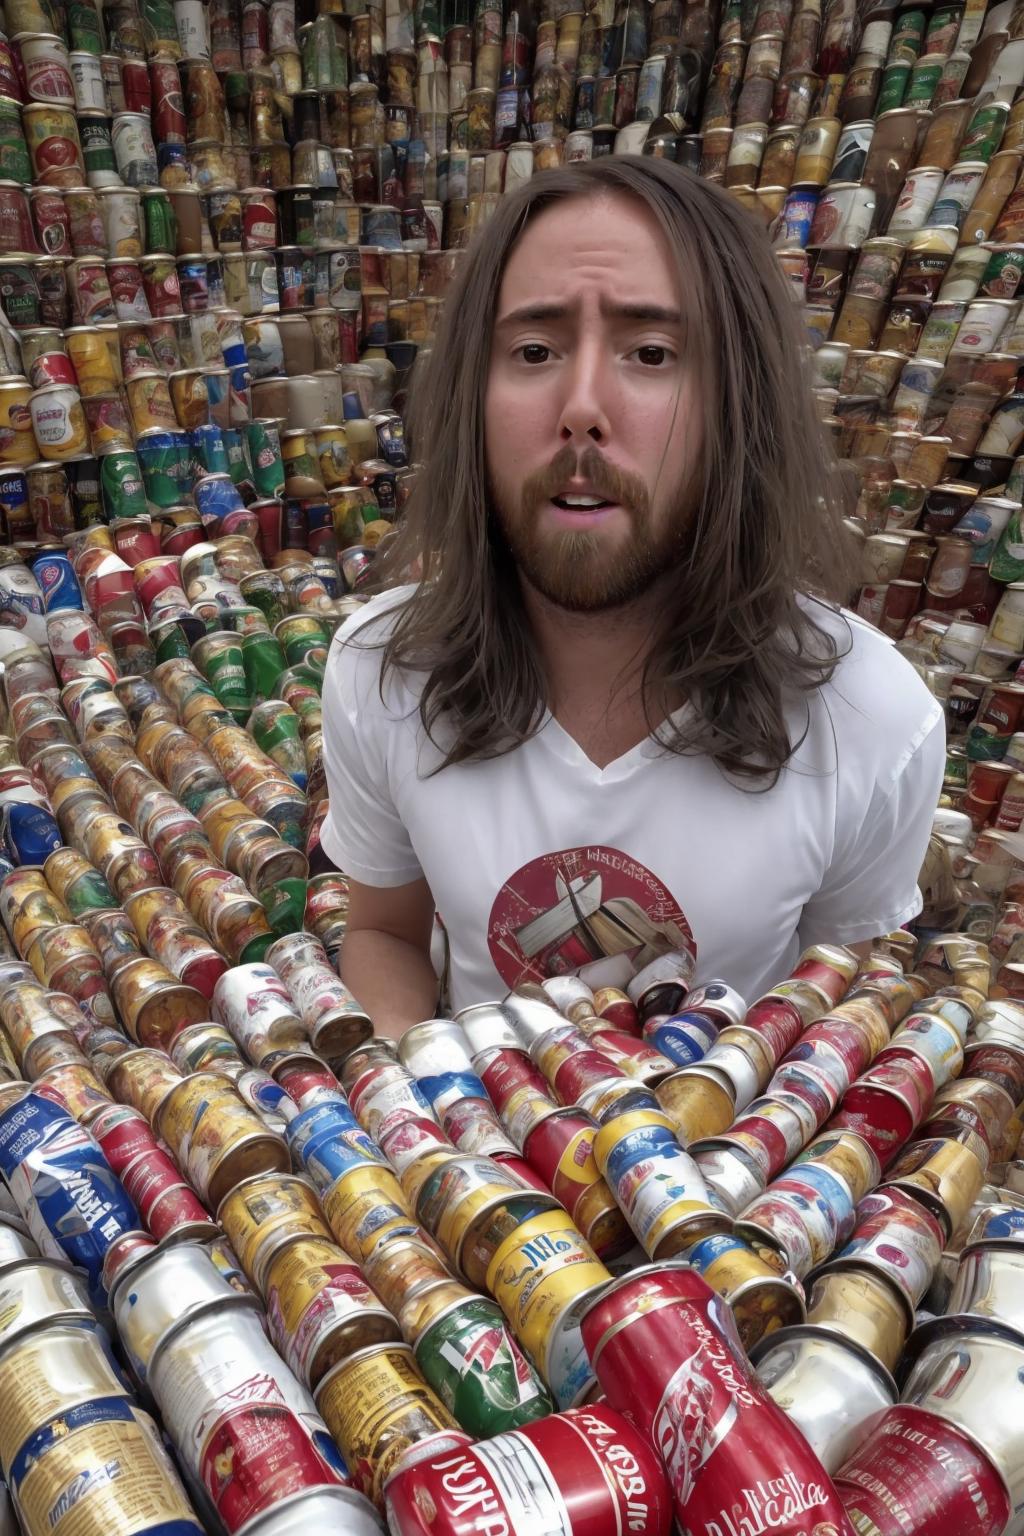 Man with a beard surrounded by many cans of soda.